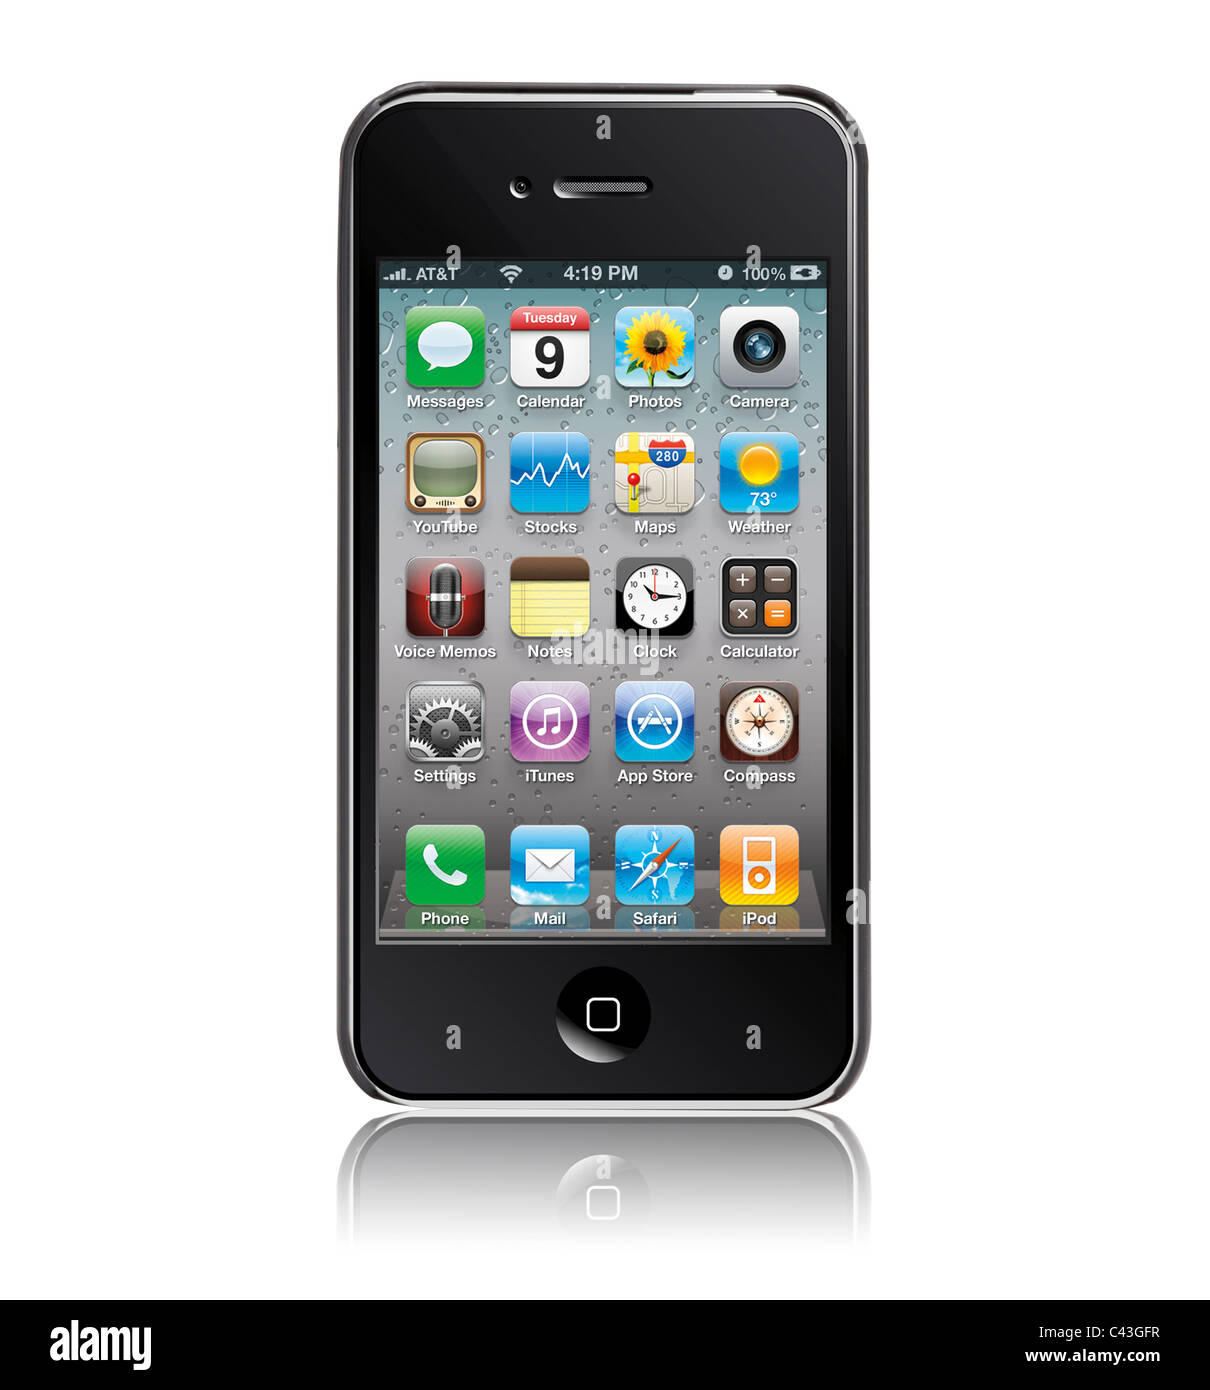 Apple iPhone 4 cut out on white background Stock Photo